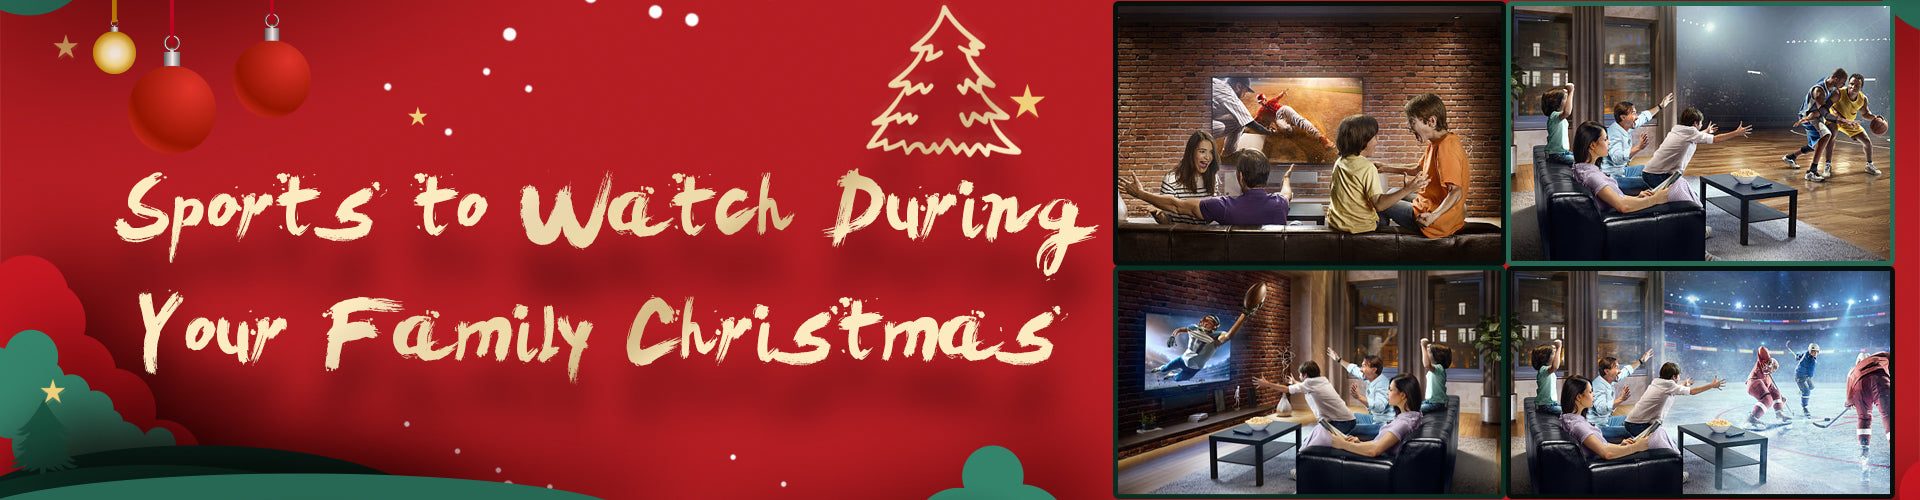 Sports to Watch During Your Family Christmas